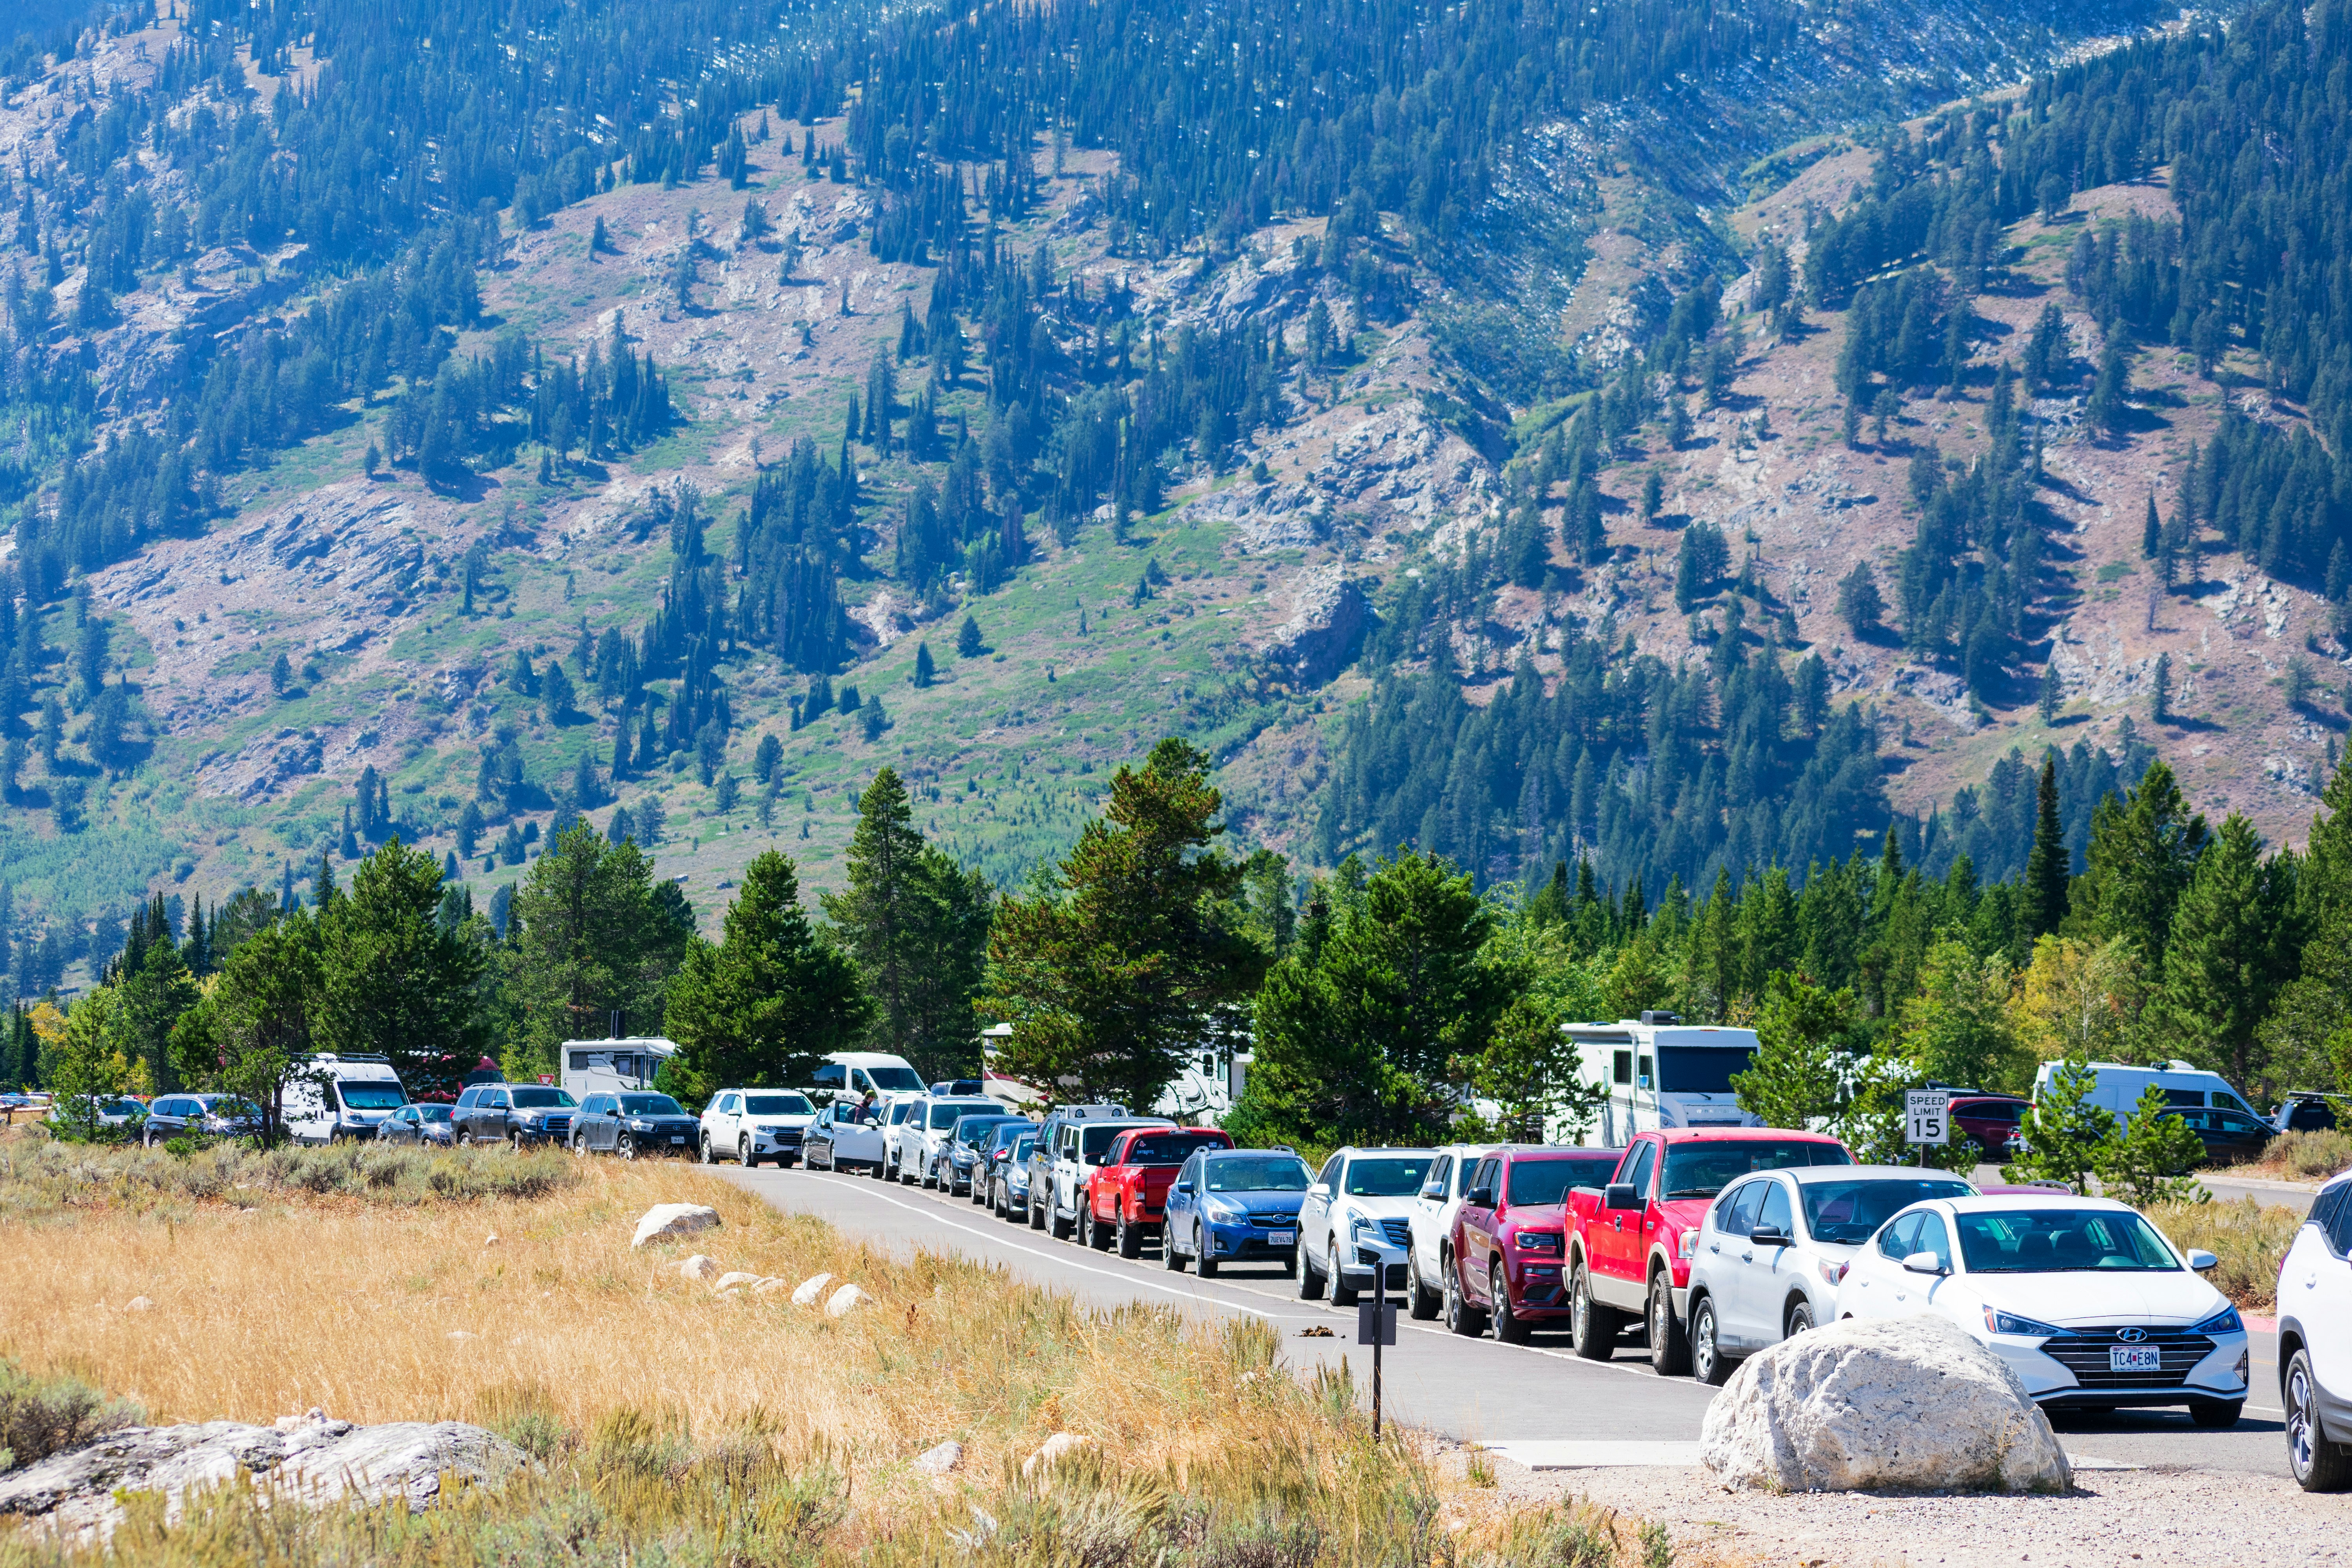 A large line of cars parked bumper to bumper on the road leading to Grand Teton National Park.